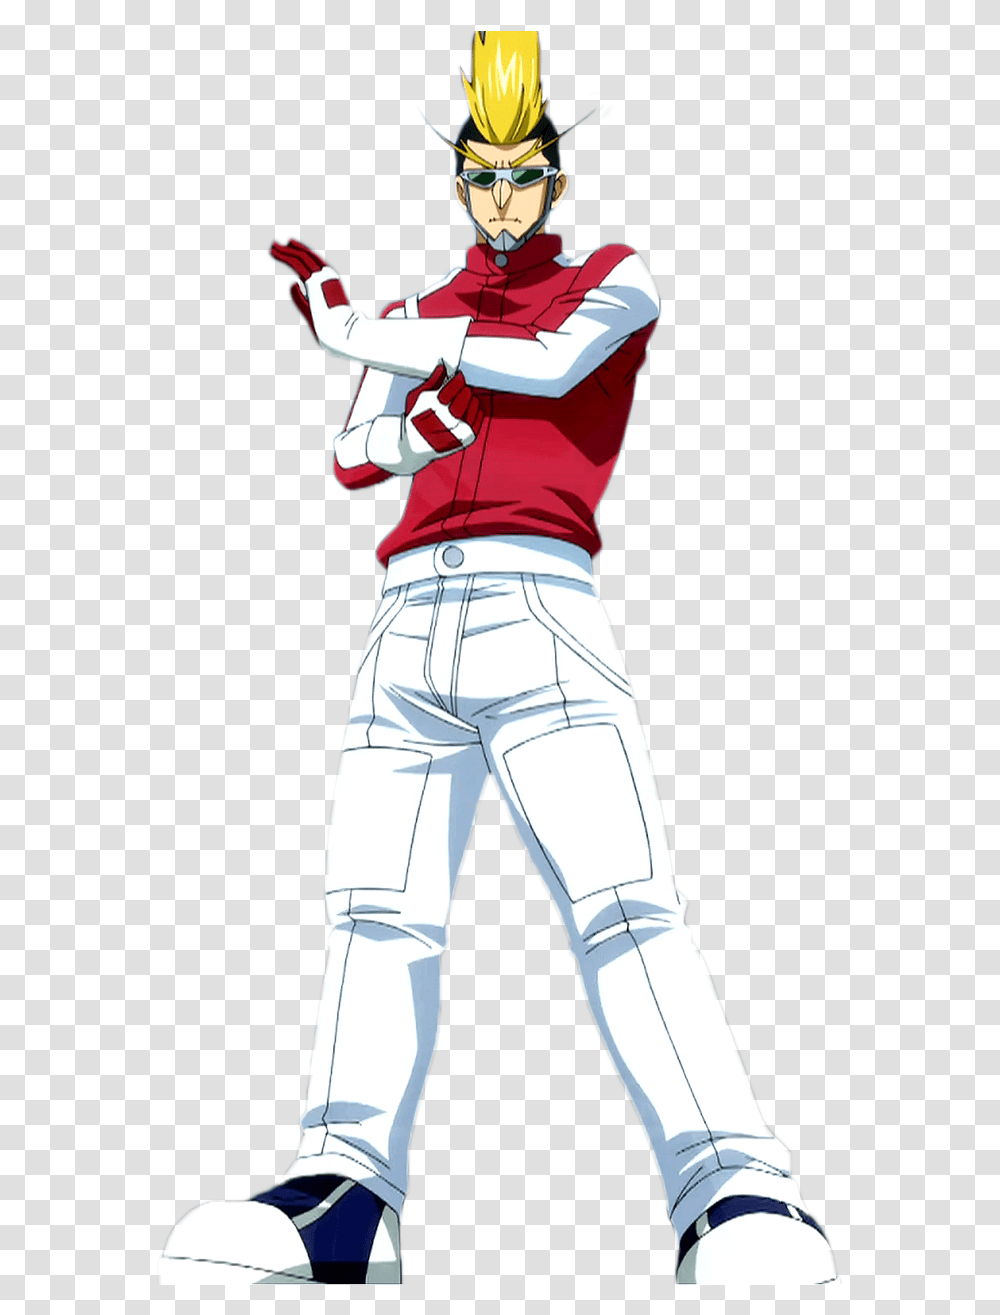 Fairy Tail Wiki Fairy Tail Racer, Person, People, Team Sport Transparent Png